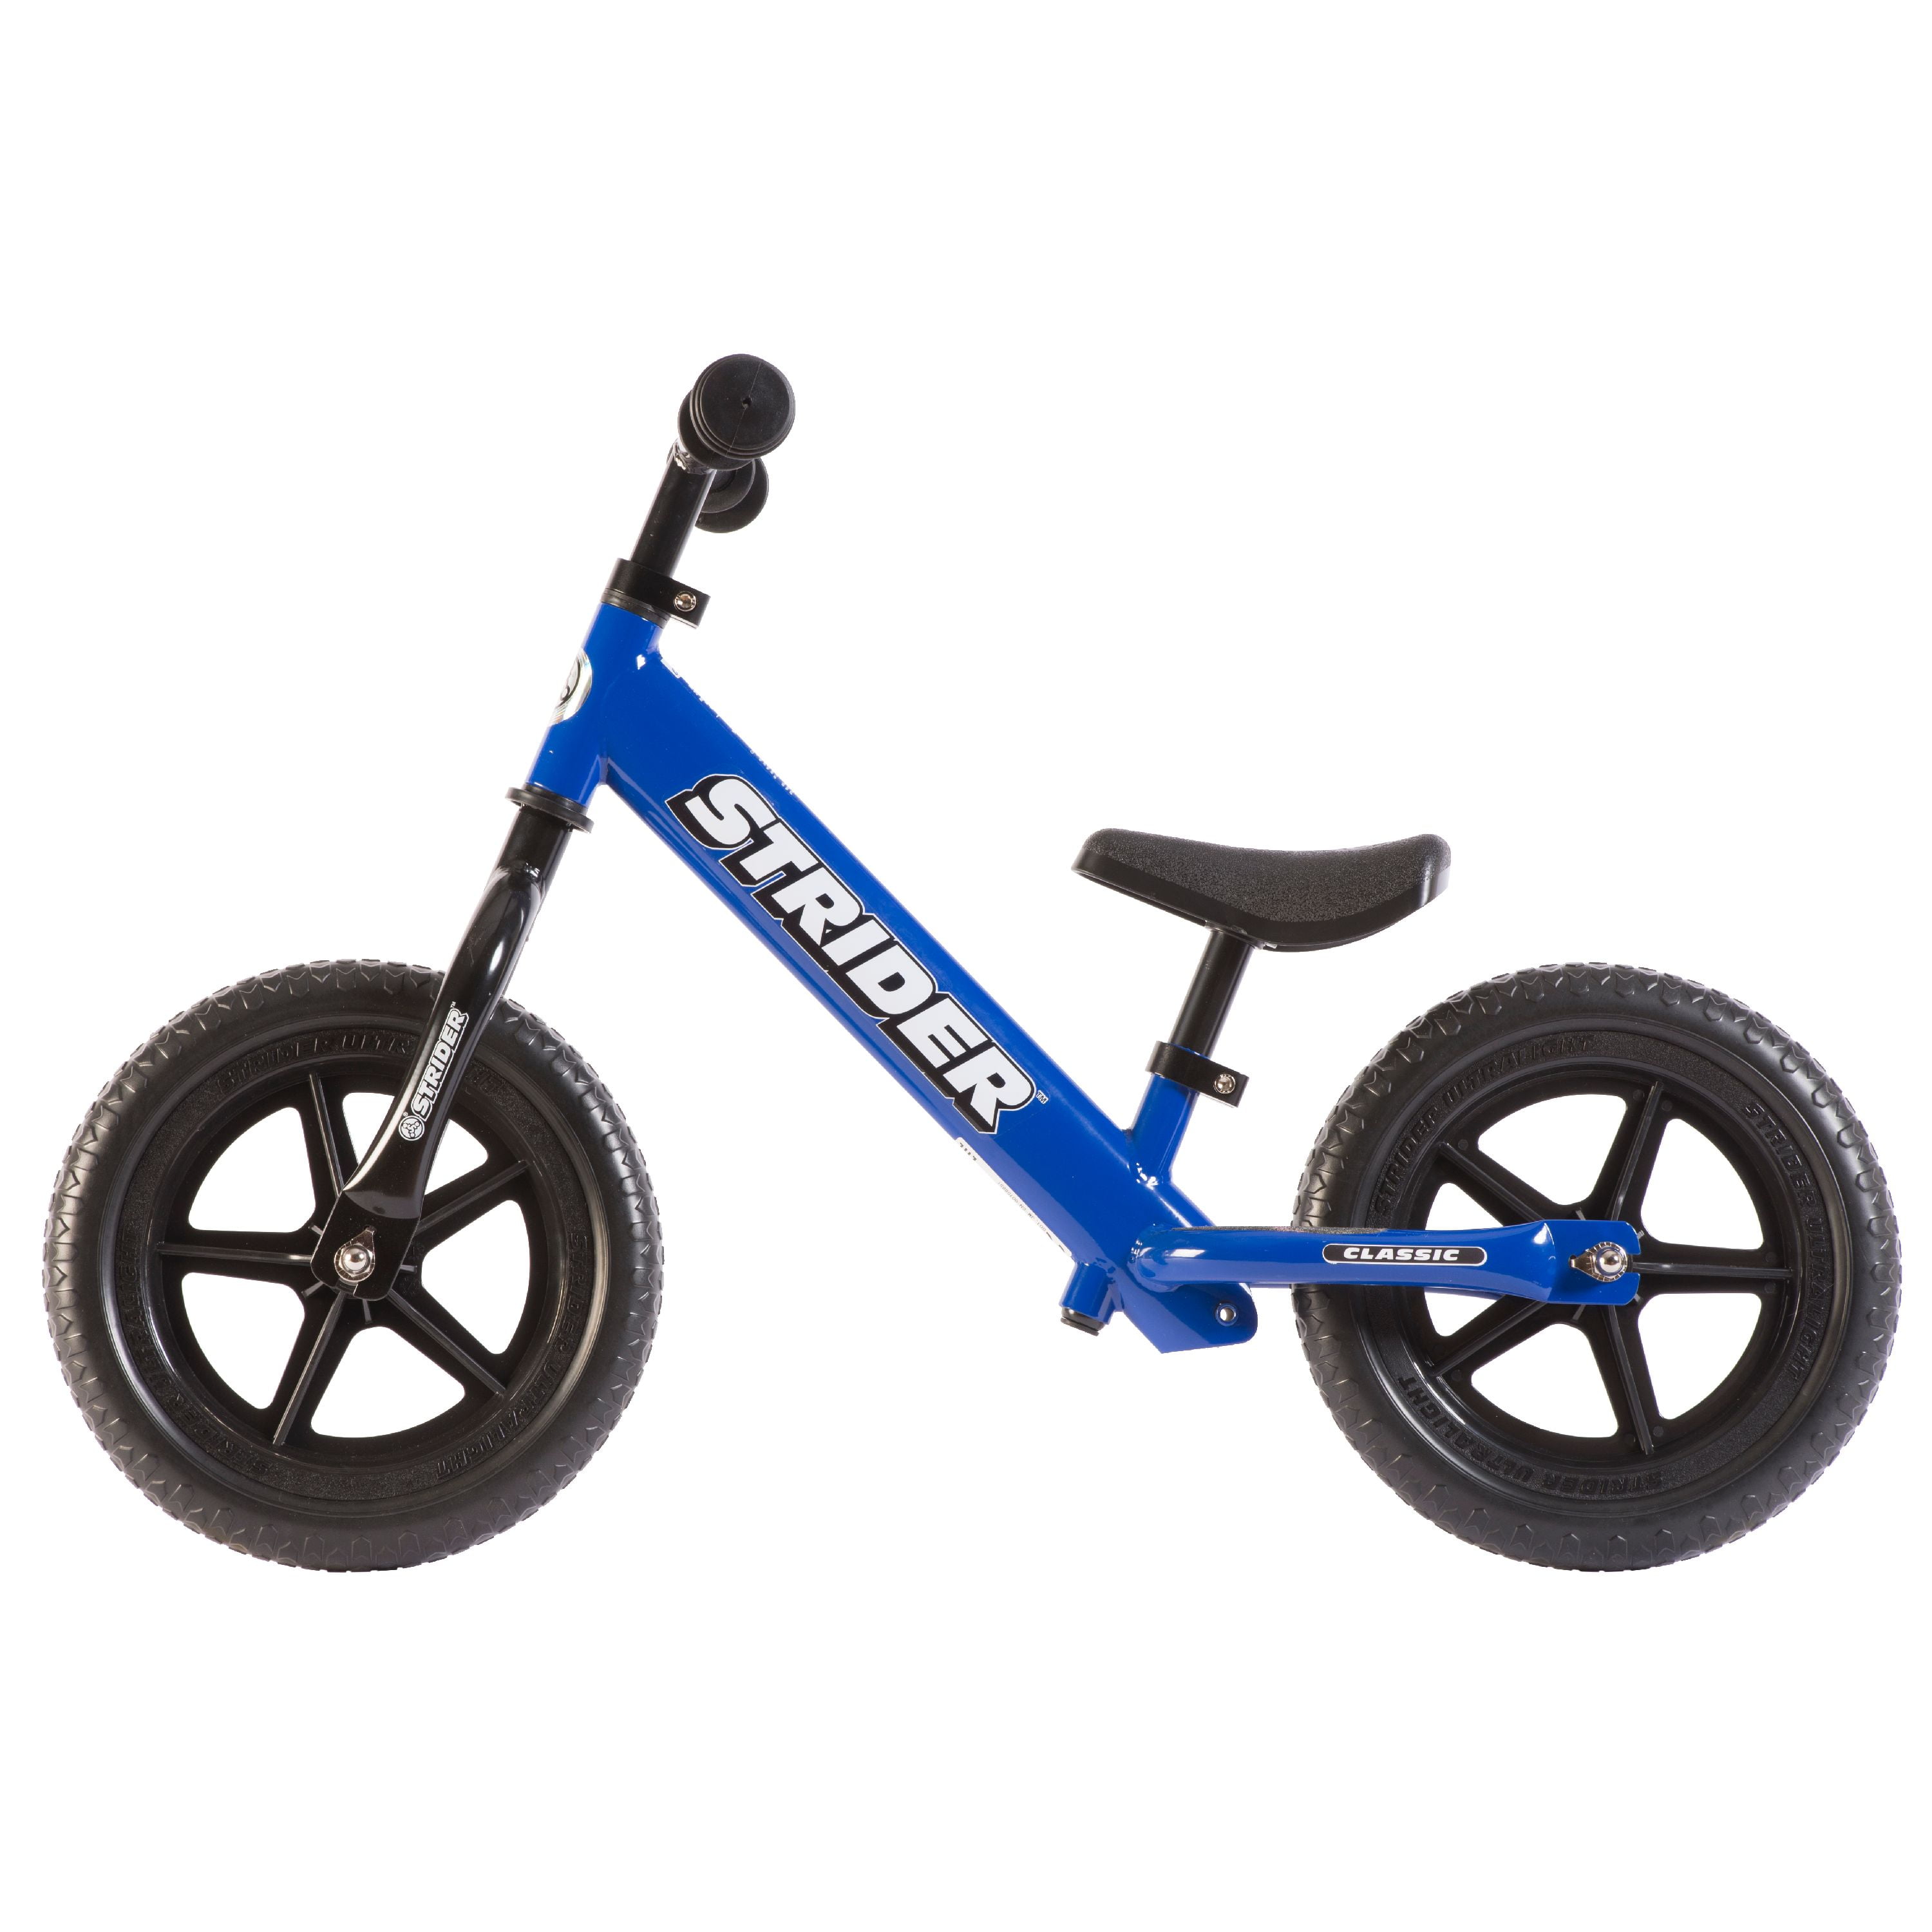 Suitable for Children Aged 3-10 16 14 Portable Children's Bicycle Balance Bike 12 Bicycle with Flash Wheel and Kettle 18 Inches,Blue,14in